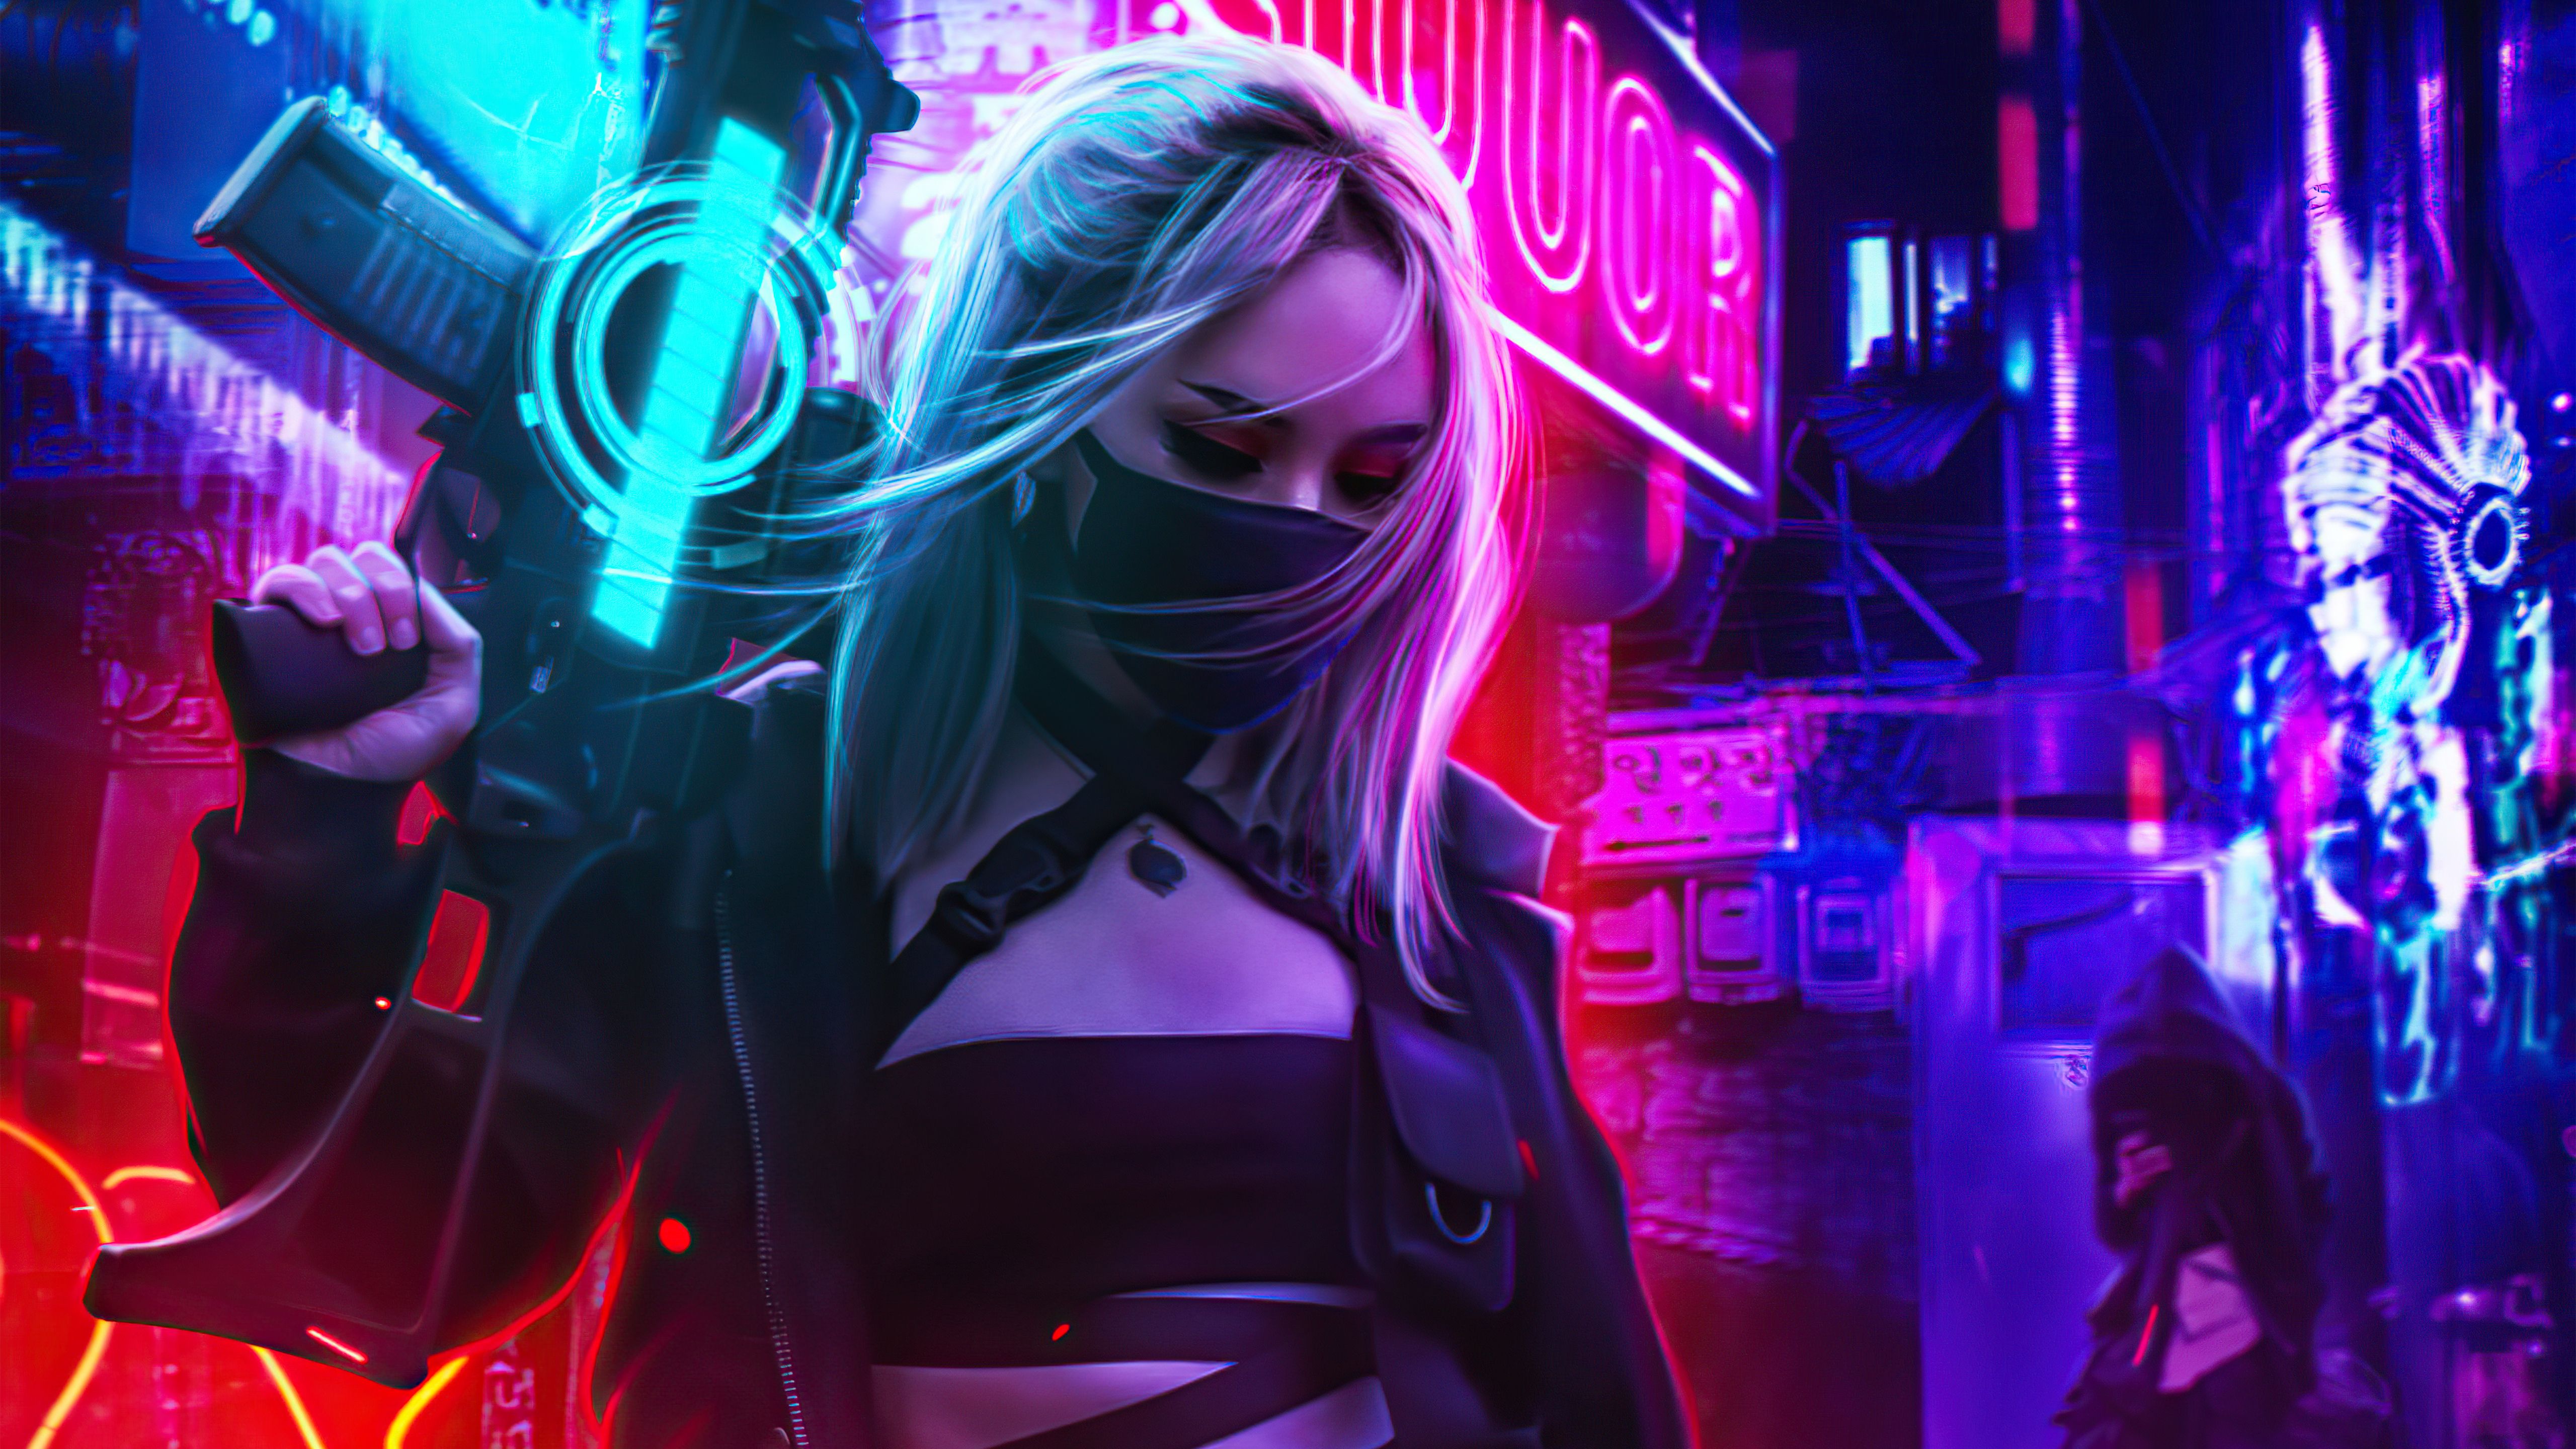 Cyberpunk Girl In Neon Mode 5k 5k HD 4k Wallpaper, Image, Background, Photo and Picture